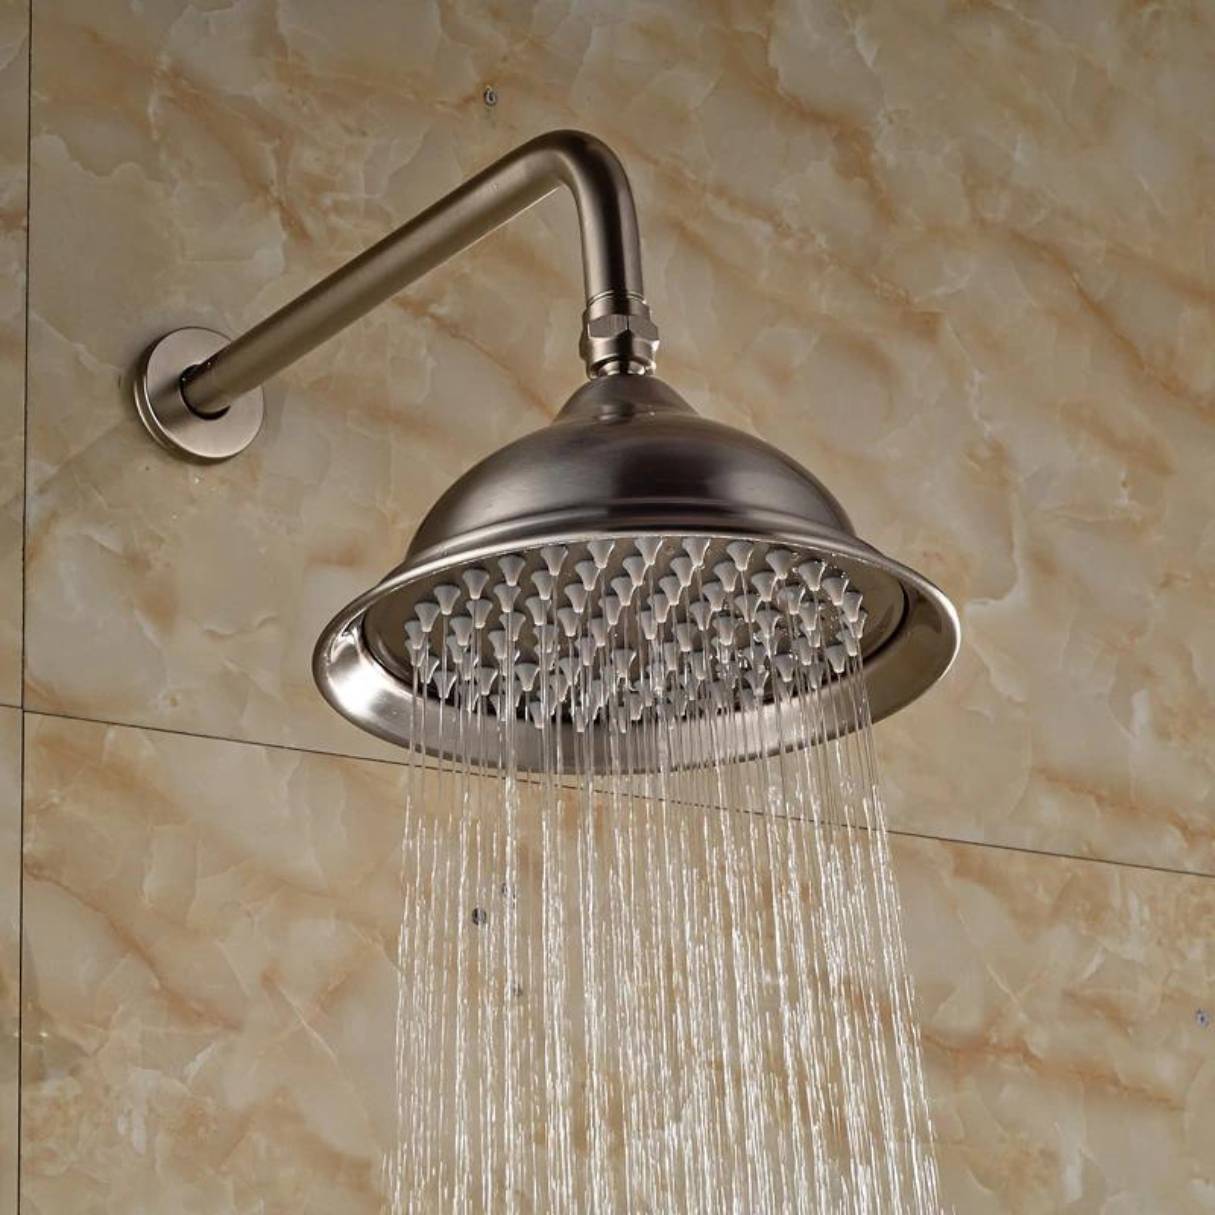 Which One Is Better: Brushed Nickel Or A Stainless Steel Showerhead?